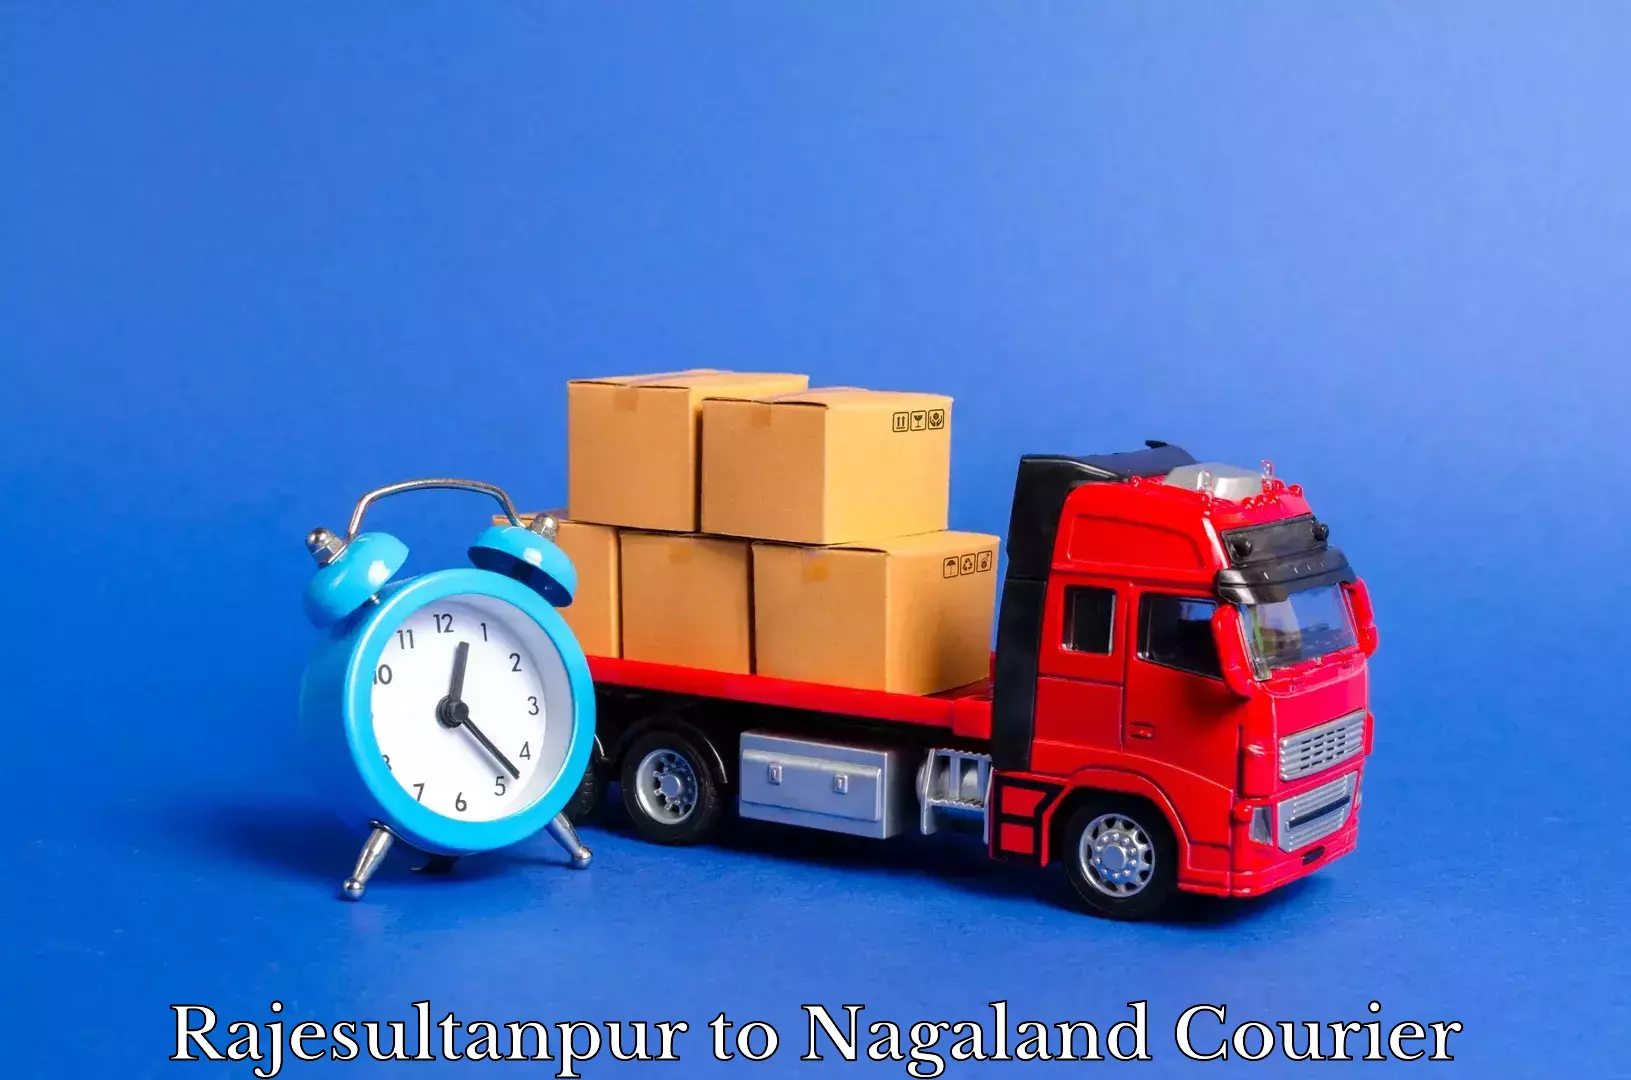 Quality moving company Rajesultanpur to Dimapur